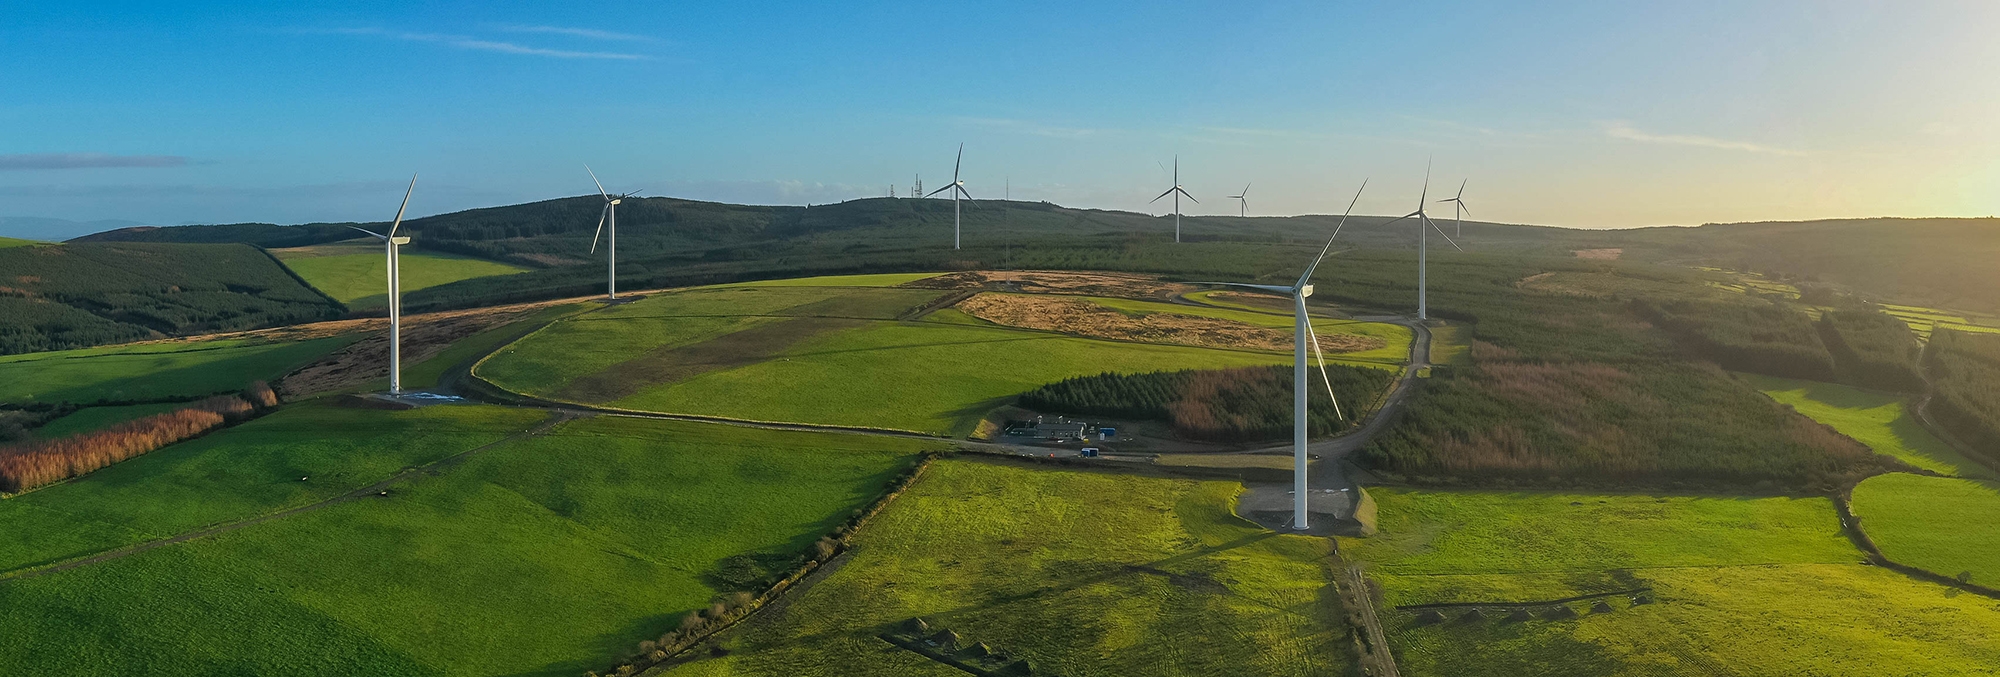 An image of a wind farm in a green field with windmills around it.